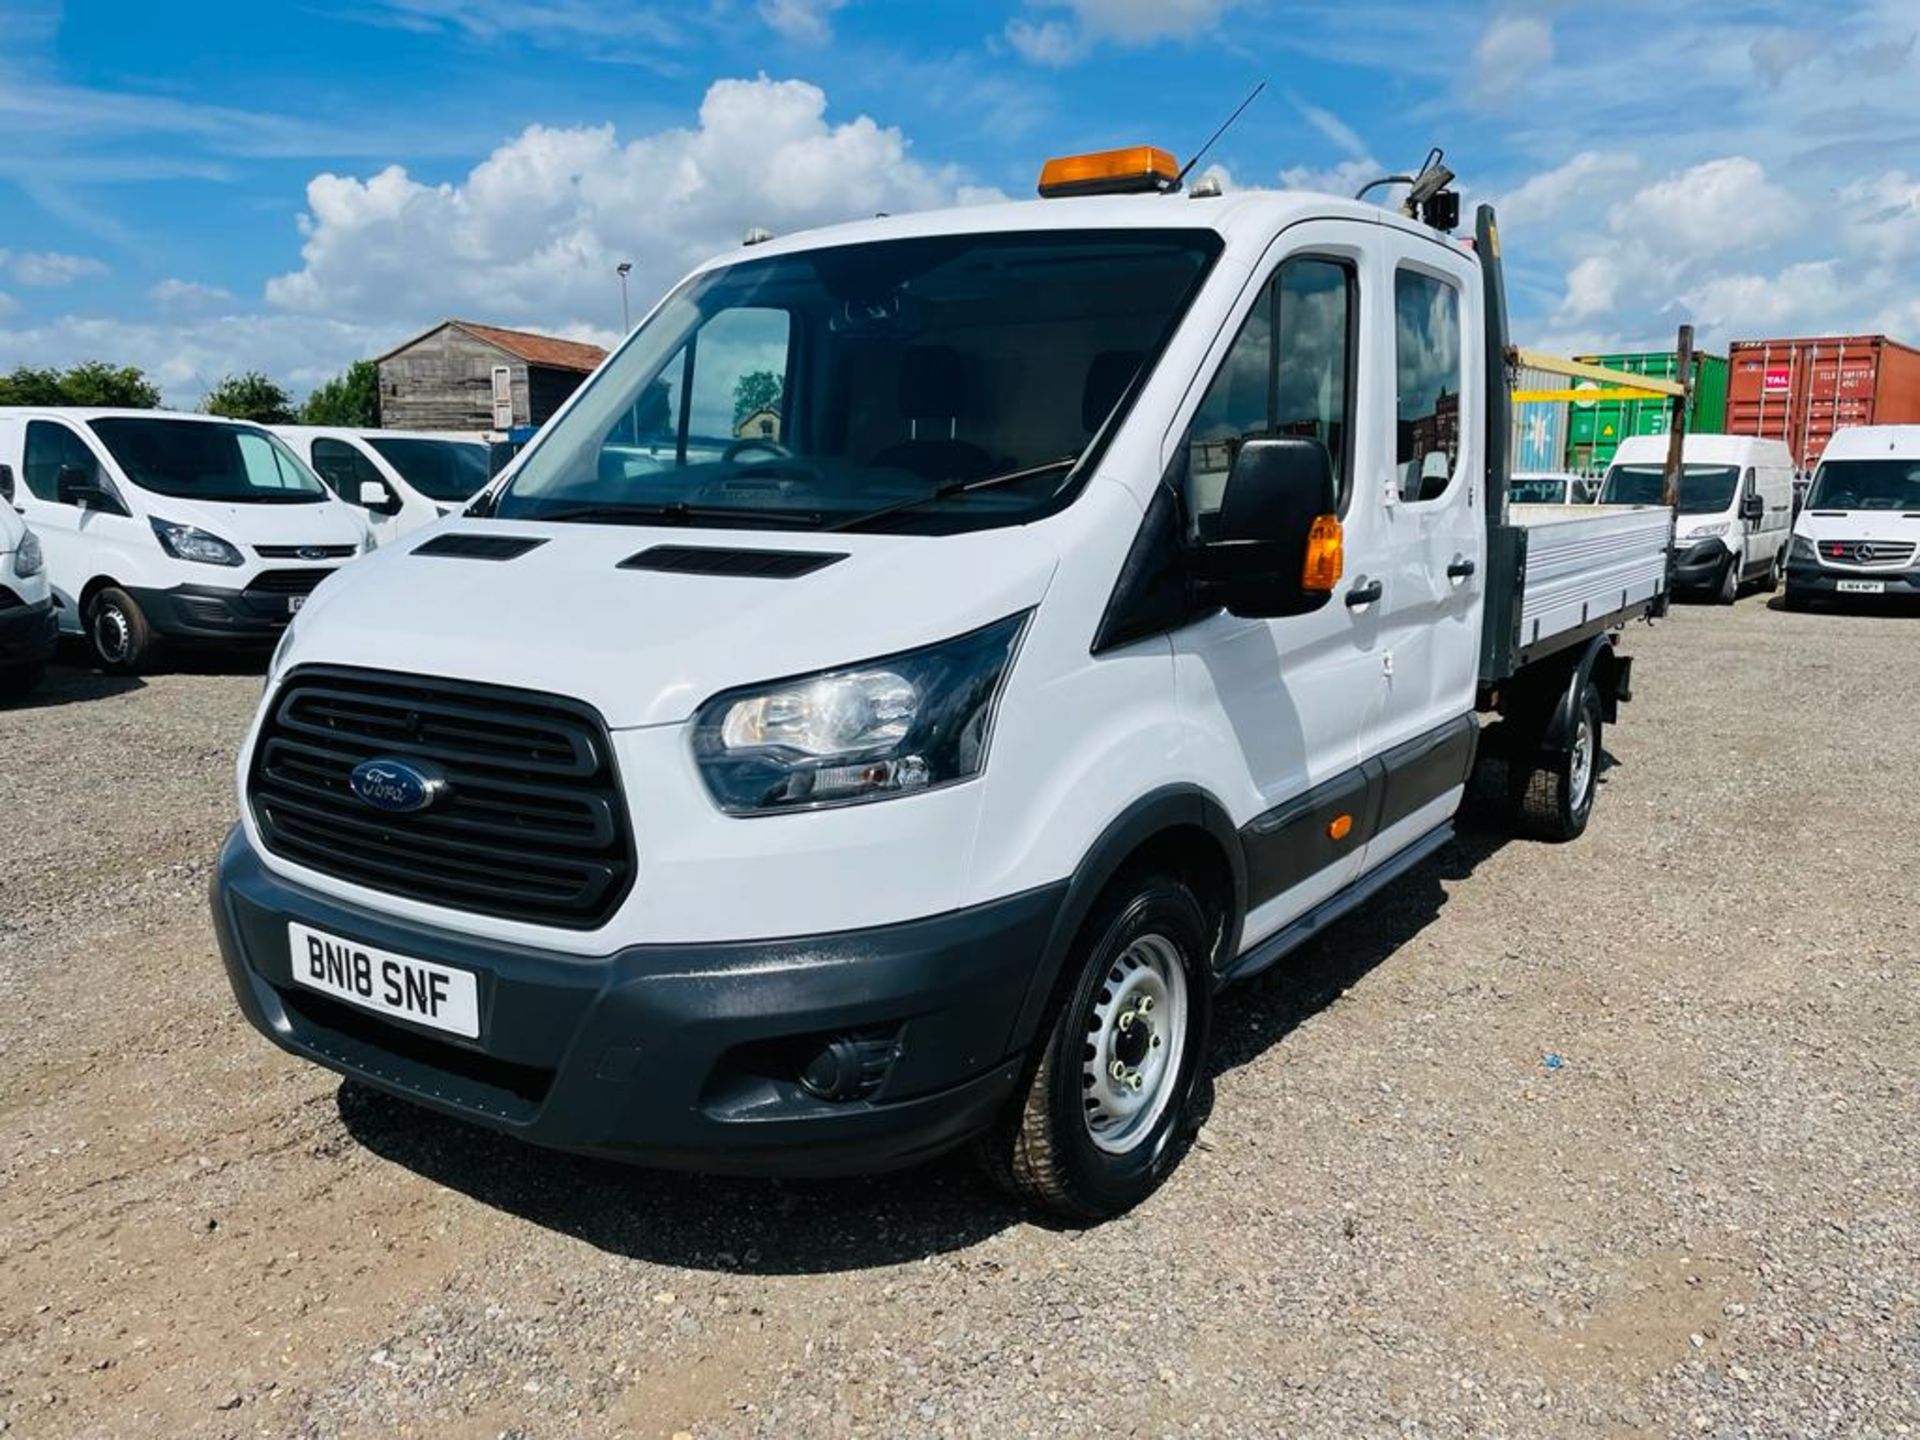 ** ON SALE **Ford Transit 2.0 TDCI 130 Double Cab Tipper 2018 '18 Reg' Euro 6 - ULEZ Compliant - Image 3 of 28